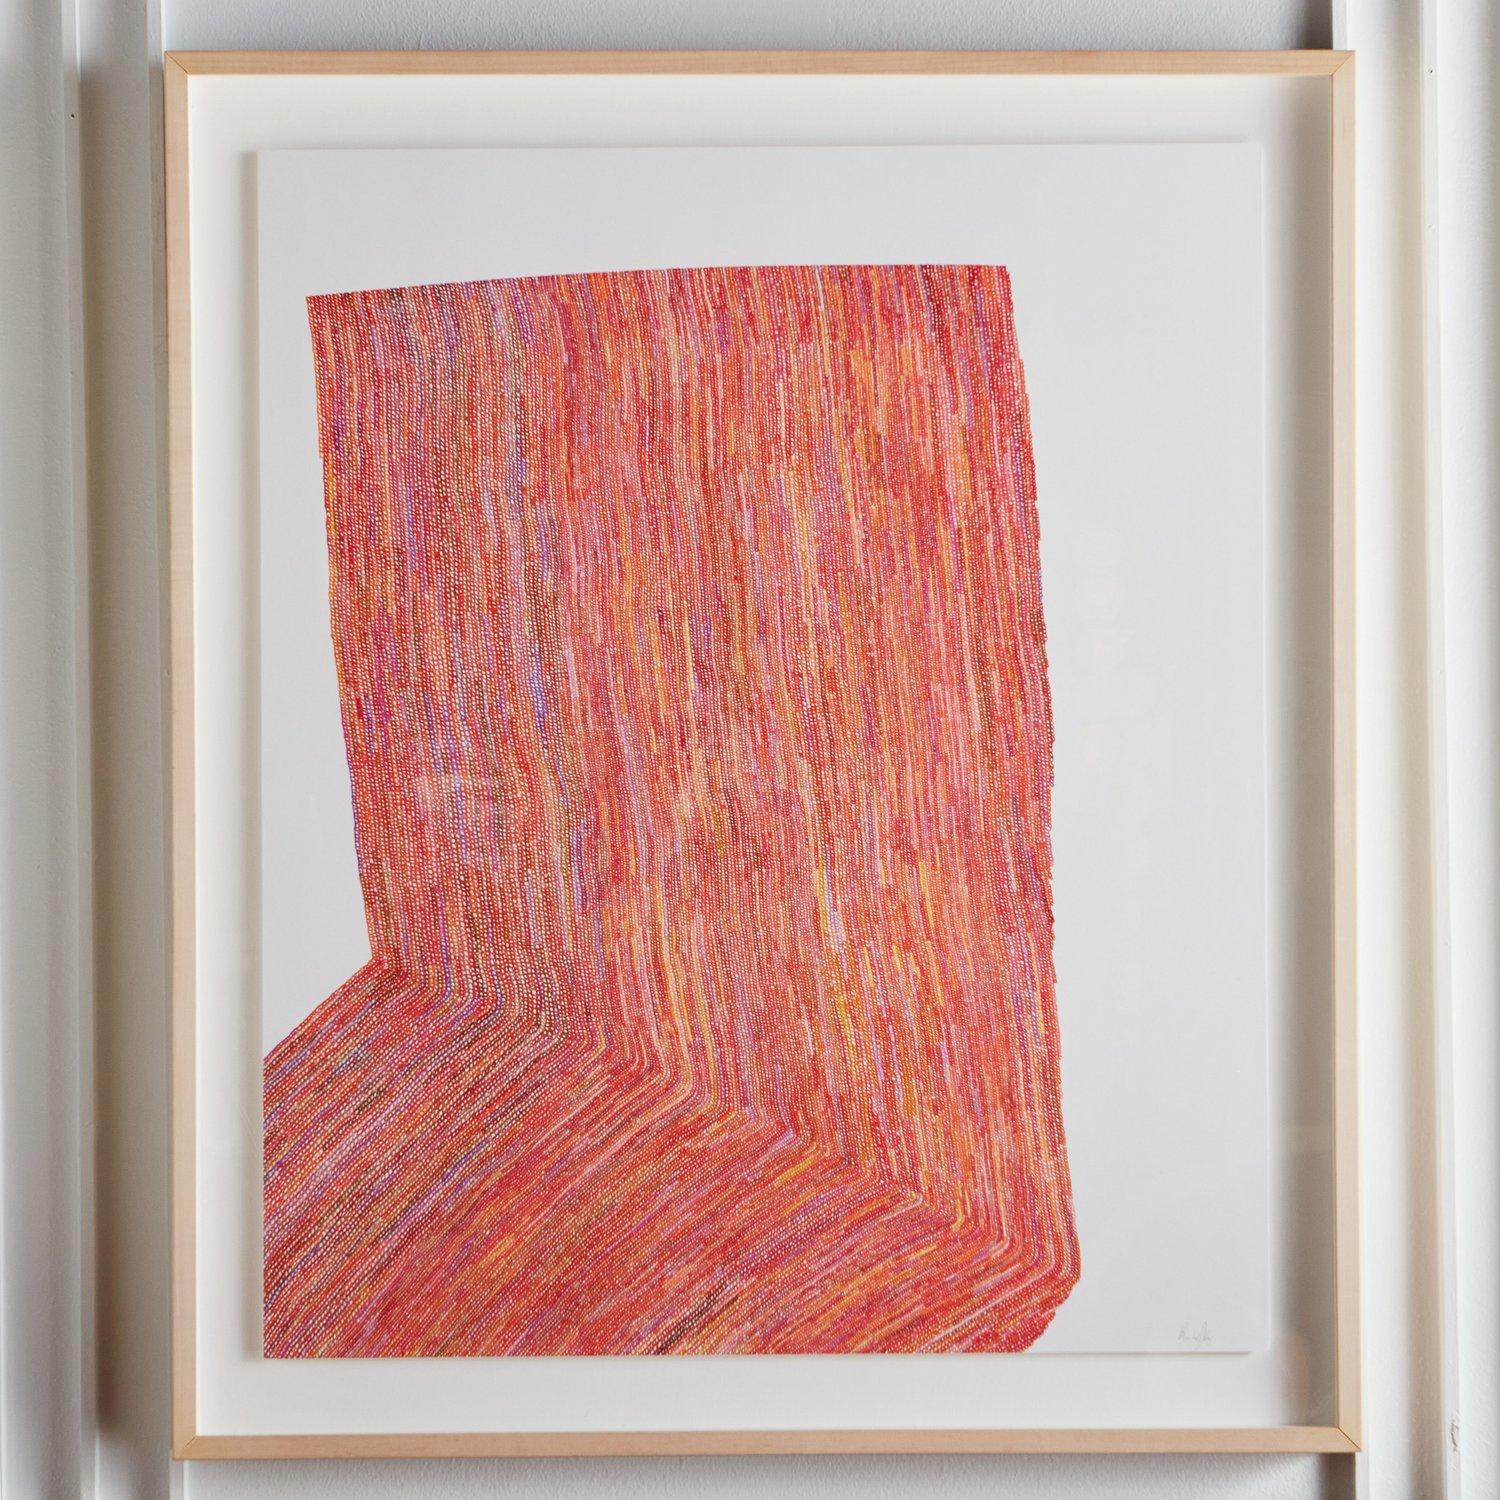 Pen on paper in a custom floating blonde wood frame with plexiglass. Signed lower right. A similar piece by Daly is also available in our shop. 

Rachel Daly is an English Artist living in Connecticut. Born and raised in Florence, Italy,